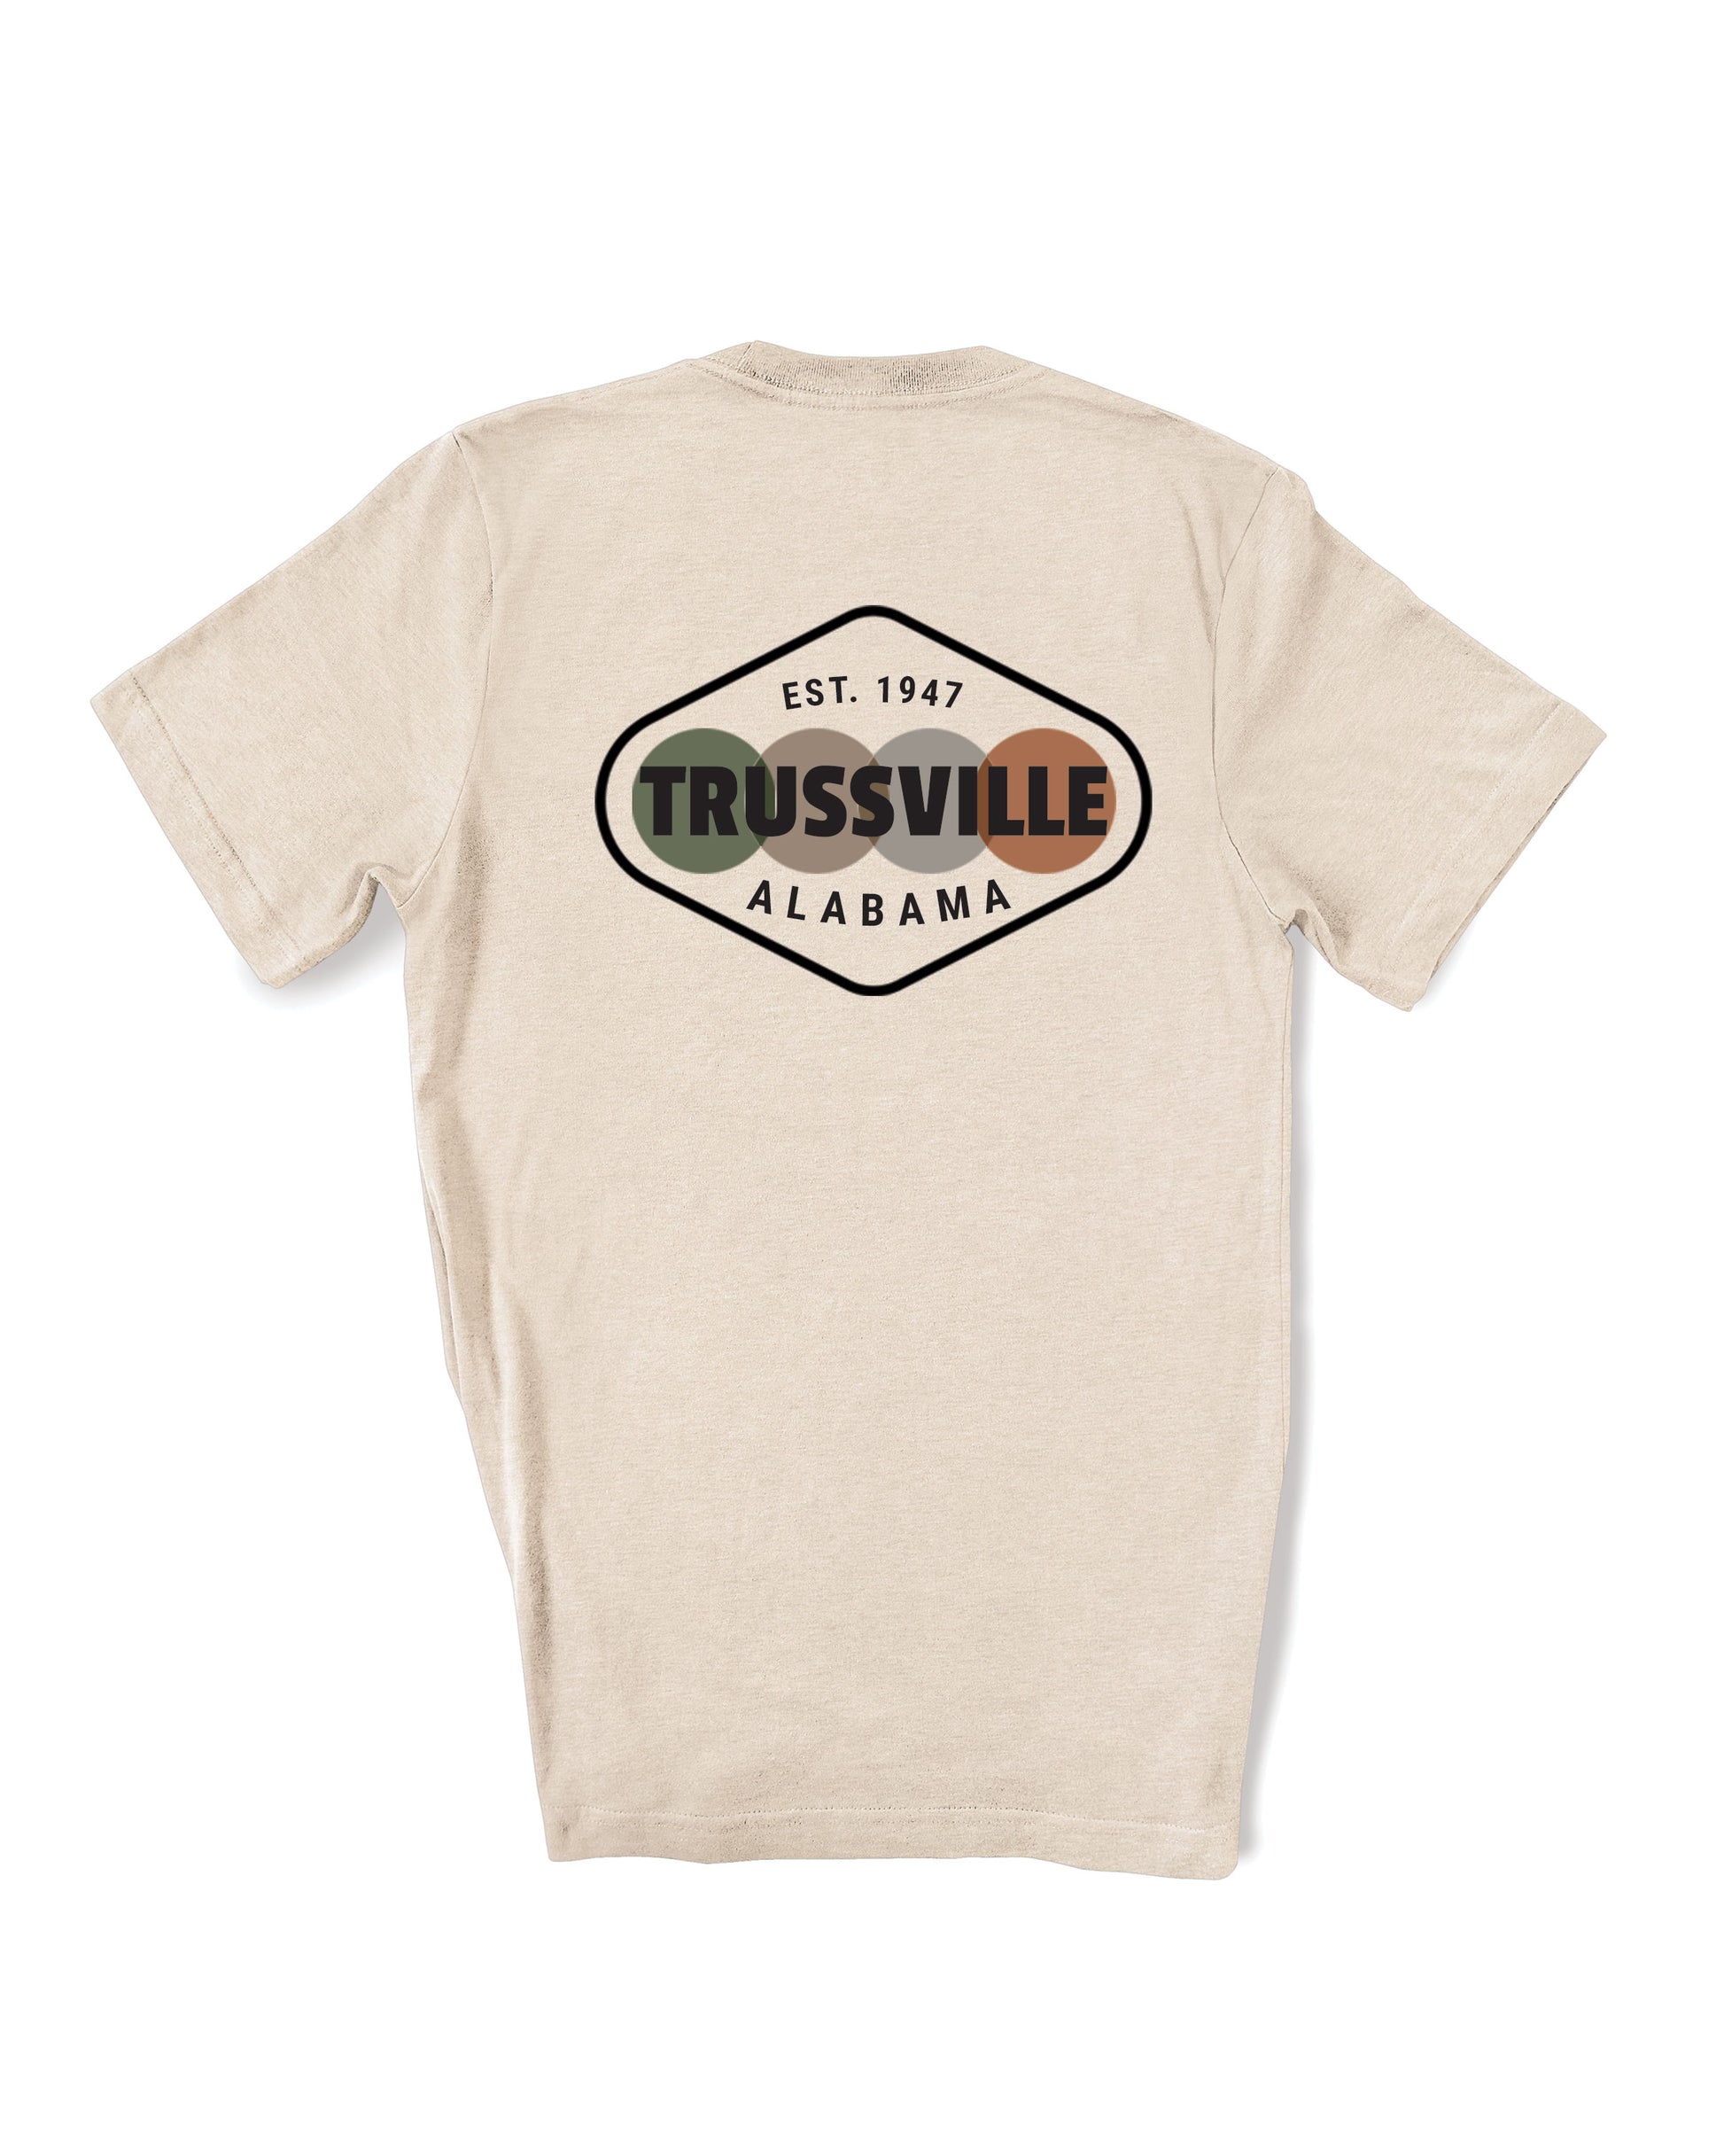 Customizable Circles | Tee | Kids-Sister Shirts-Sister Shirts, Cute & Custom Tees for Mama & Littles in Trussville, Alabama.